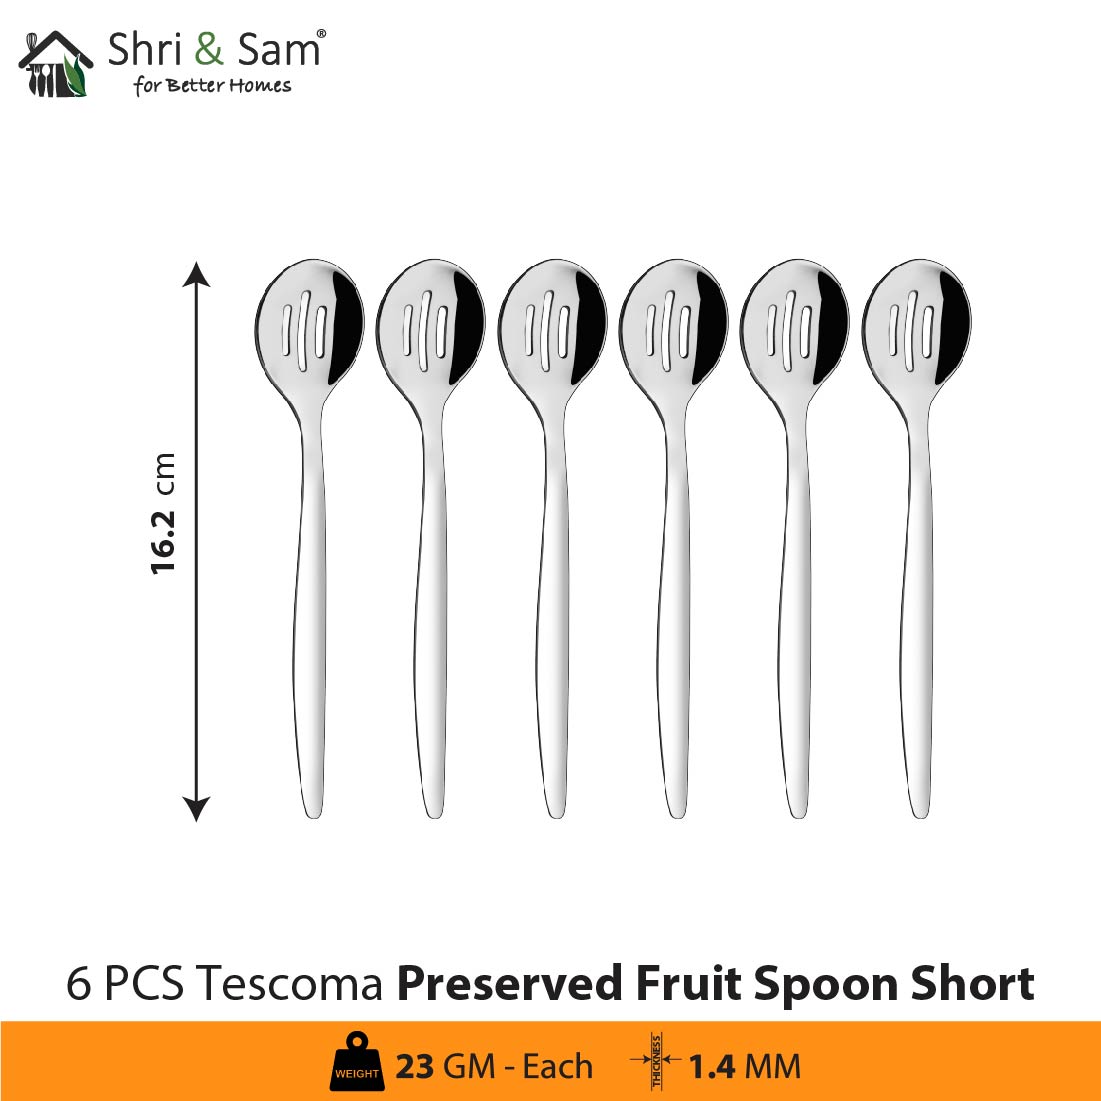 Stainless Steel Cutlery Tescoma